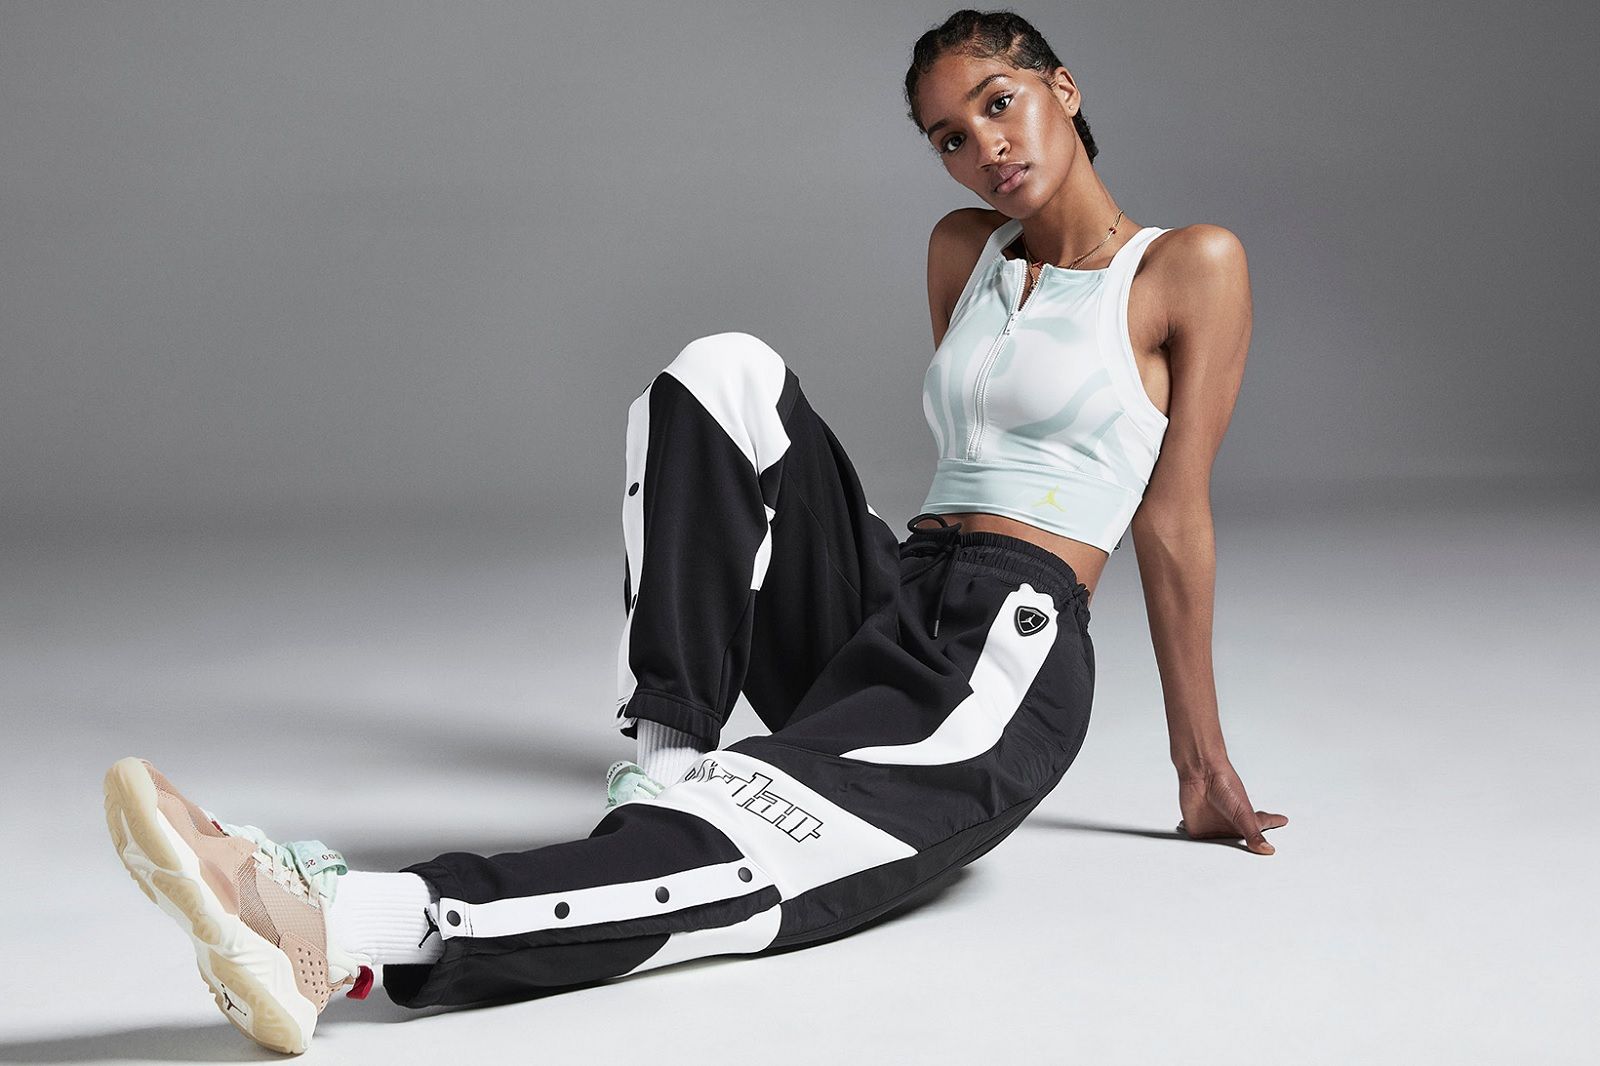 Jordan Brand presents a new apparel collection for women